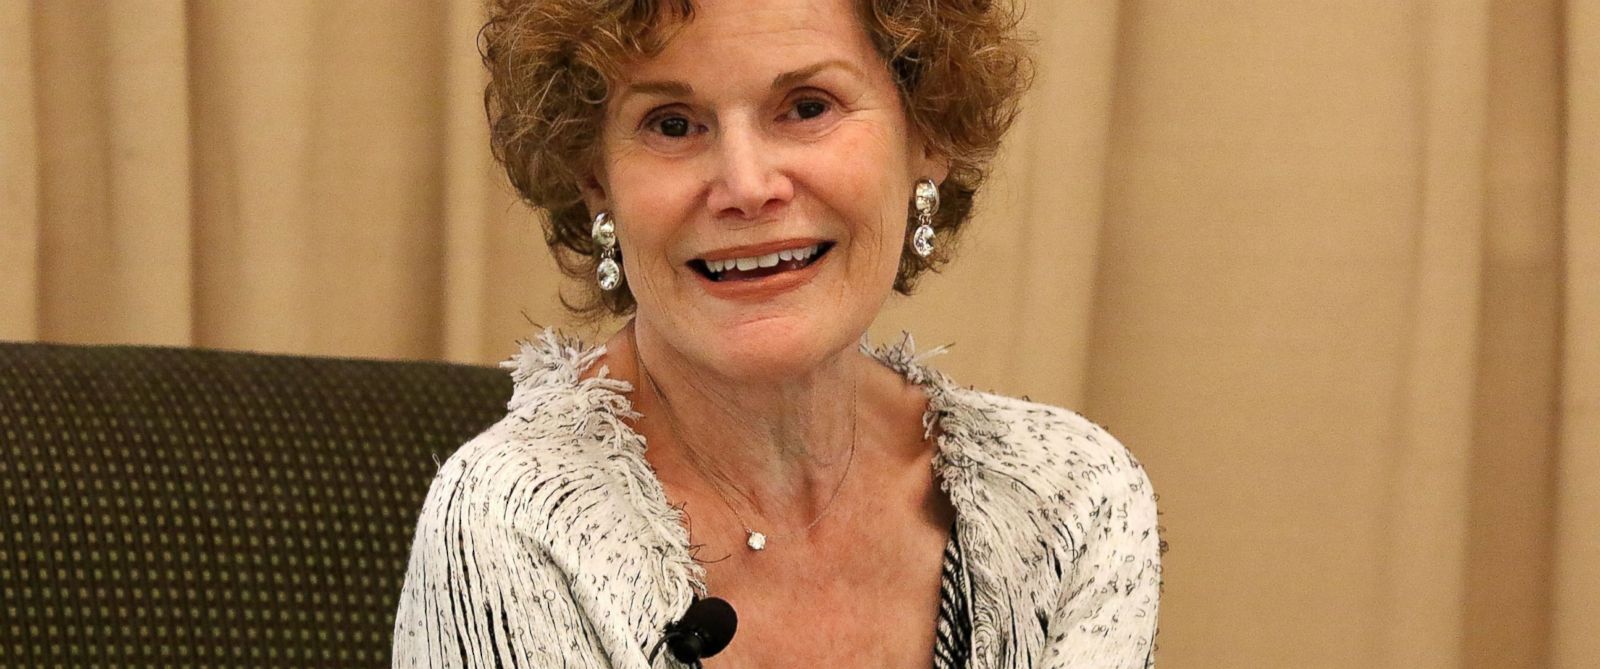  Happy birthday, Judy Blume (née en 1938)! Thank you for helping millions of girls get through adolescence! 